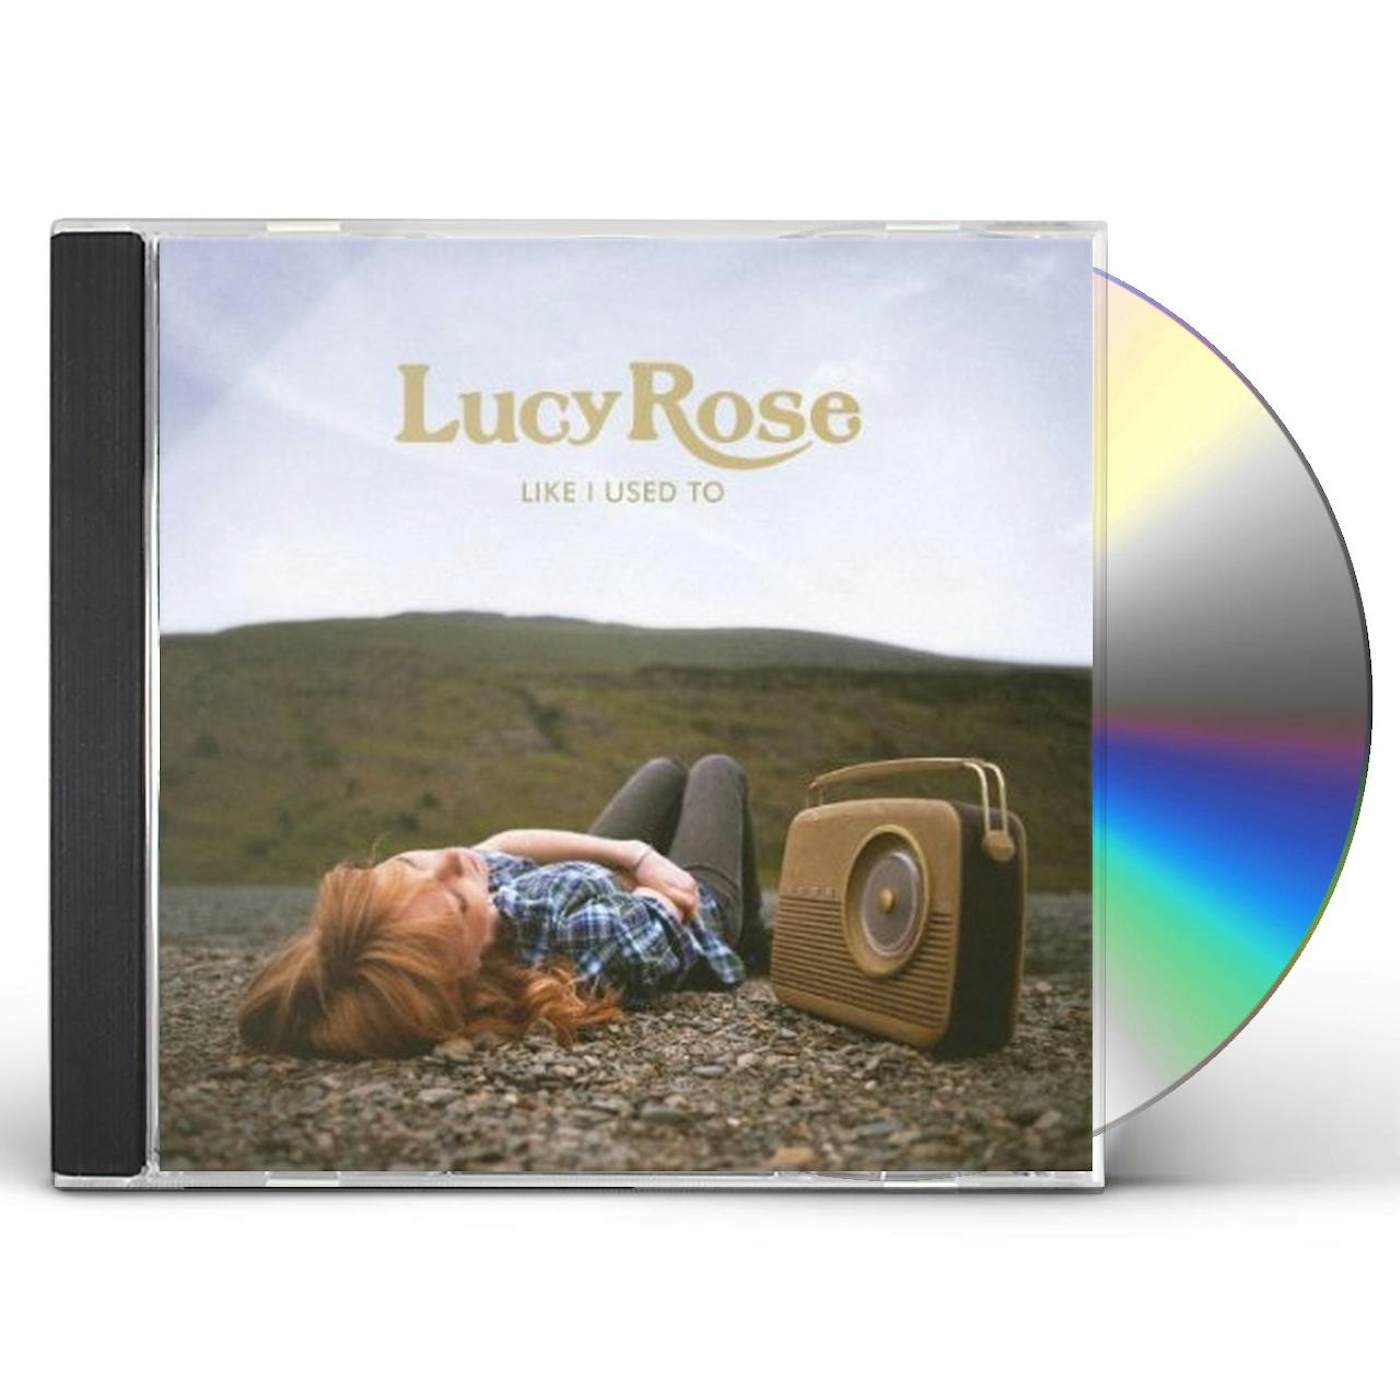 Lucy Rose LIKE I USED TO CD